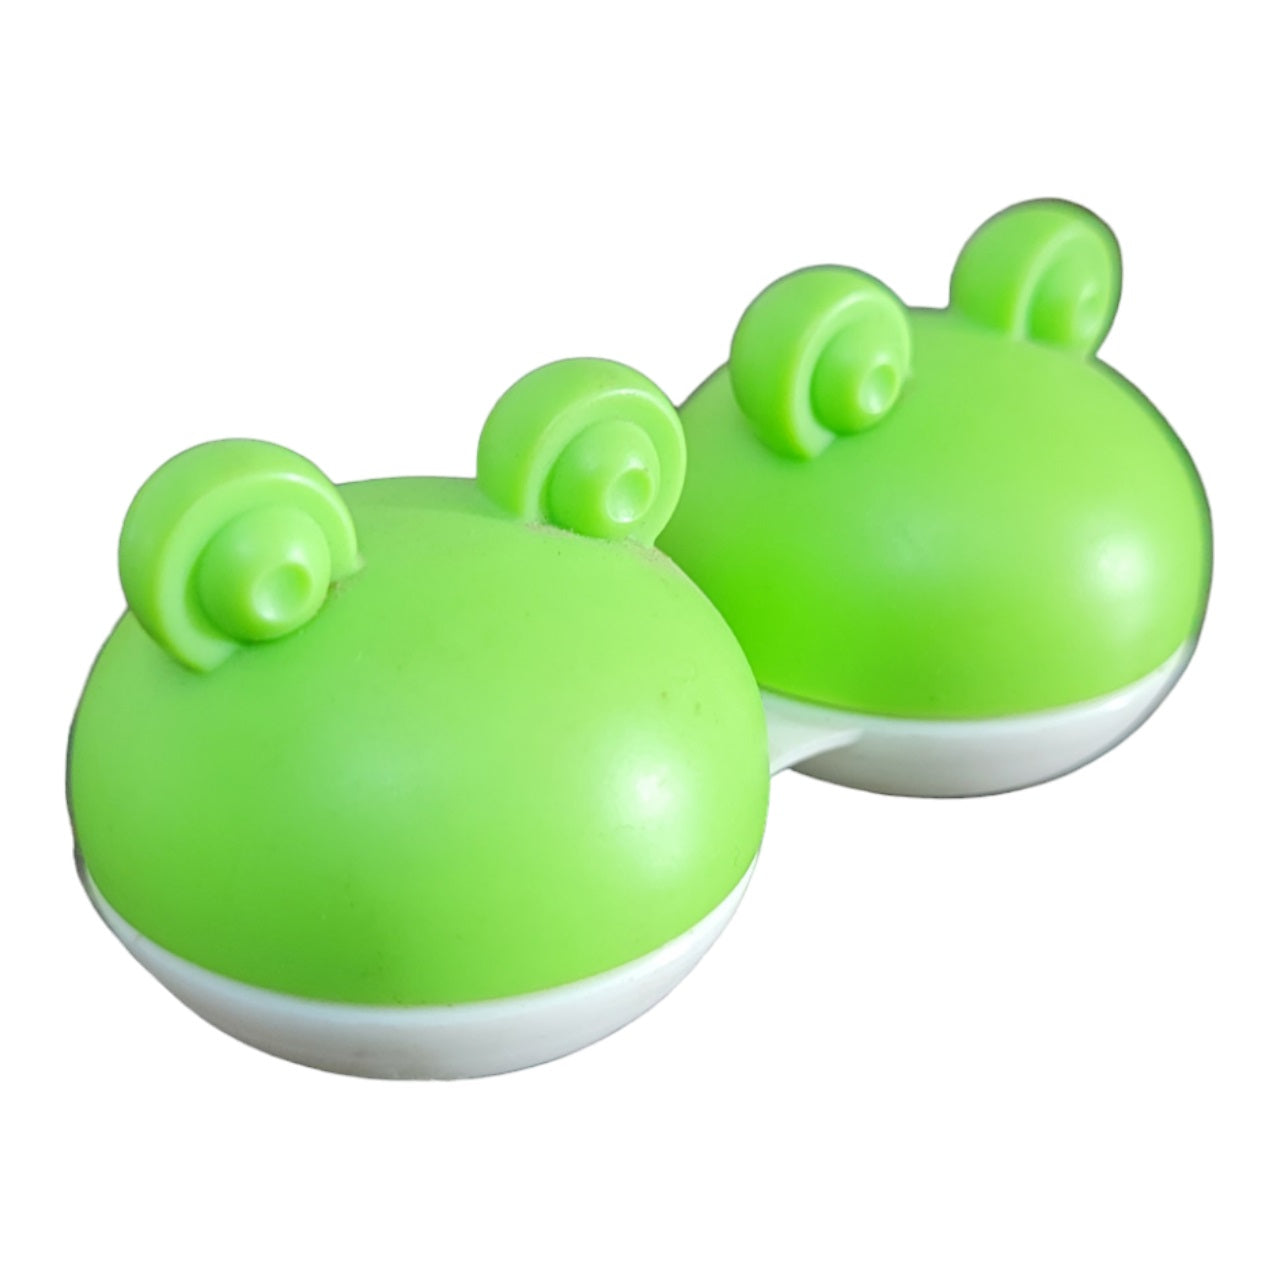 Frog Contact Lens Case | Fancy Contact Lenses Case Green Color by Affaires Qcase-0046